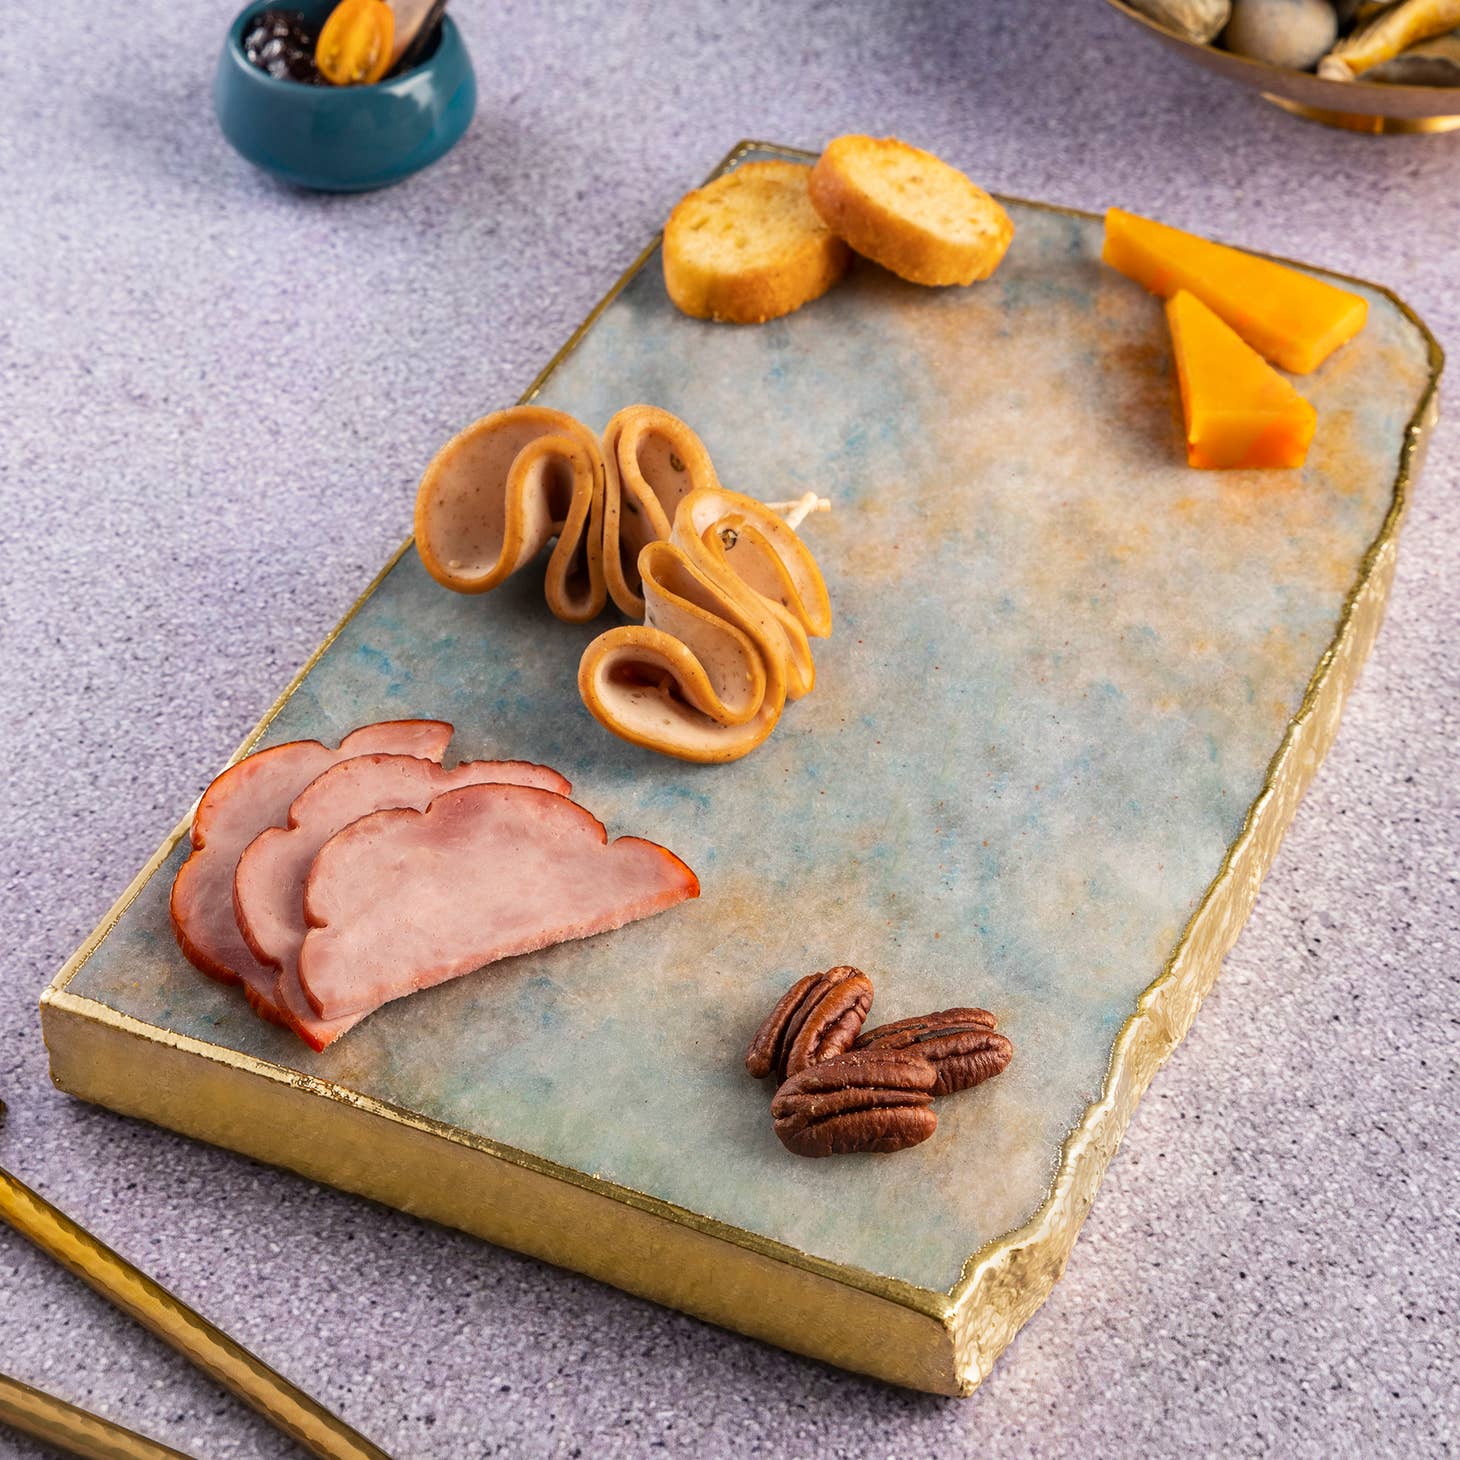 Suitable for use at both formal and informal occasions, this handcrafted aventurine cheese board is gilded with gold edges, & the perfect size to serve an array of options. made in india